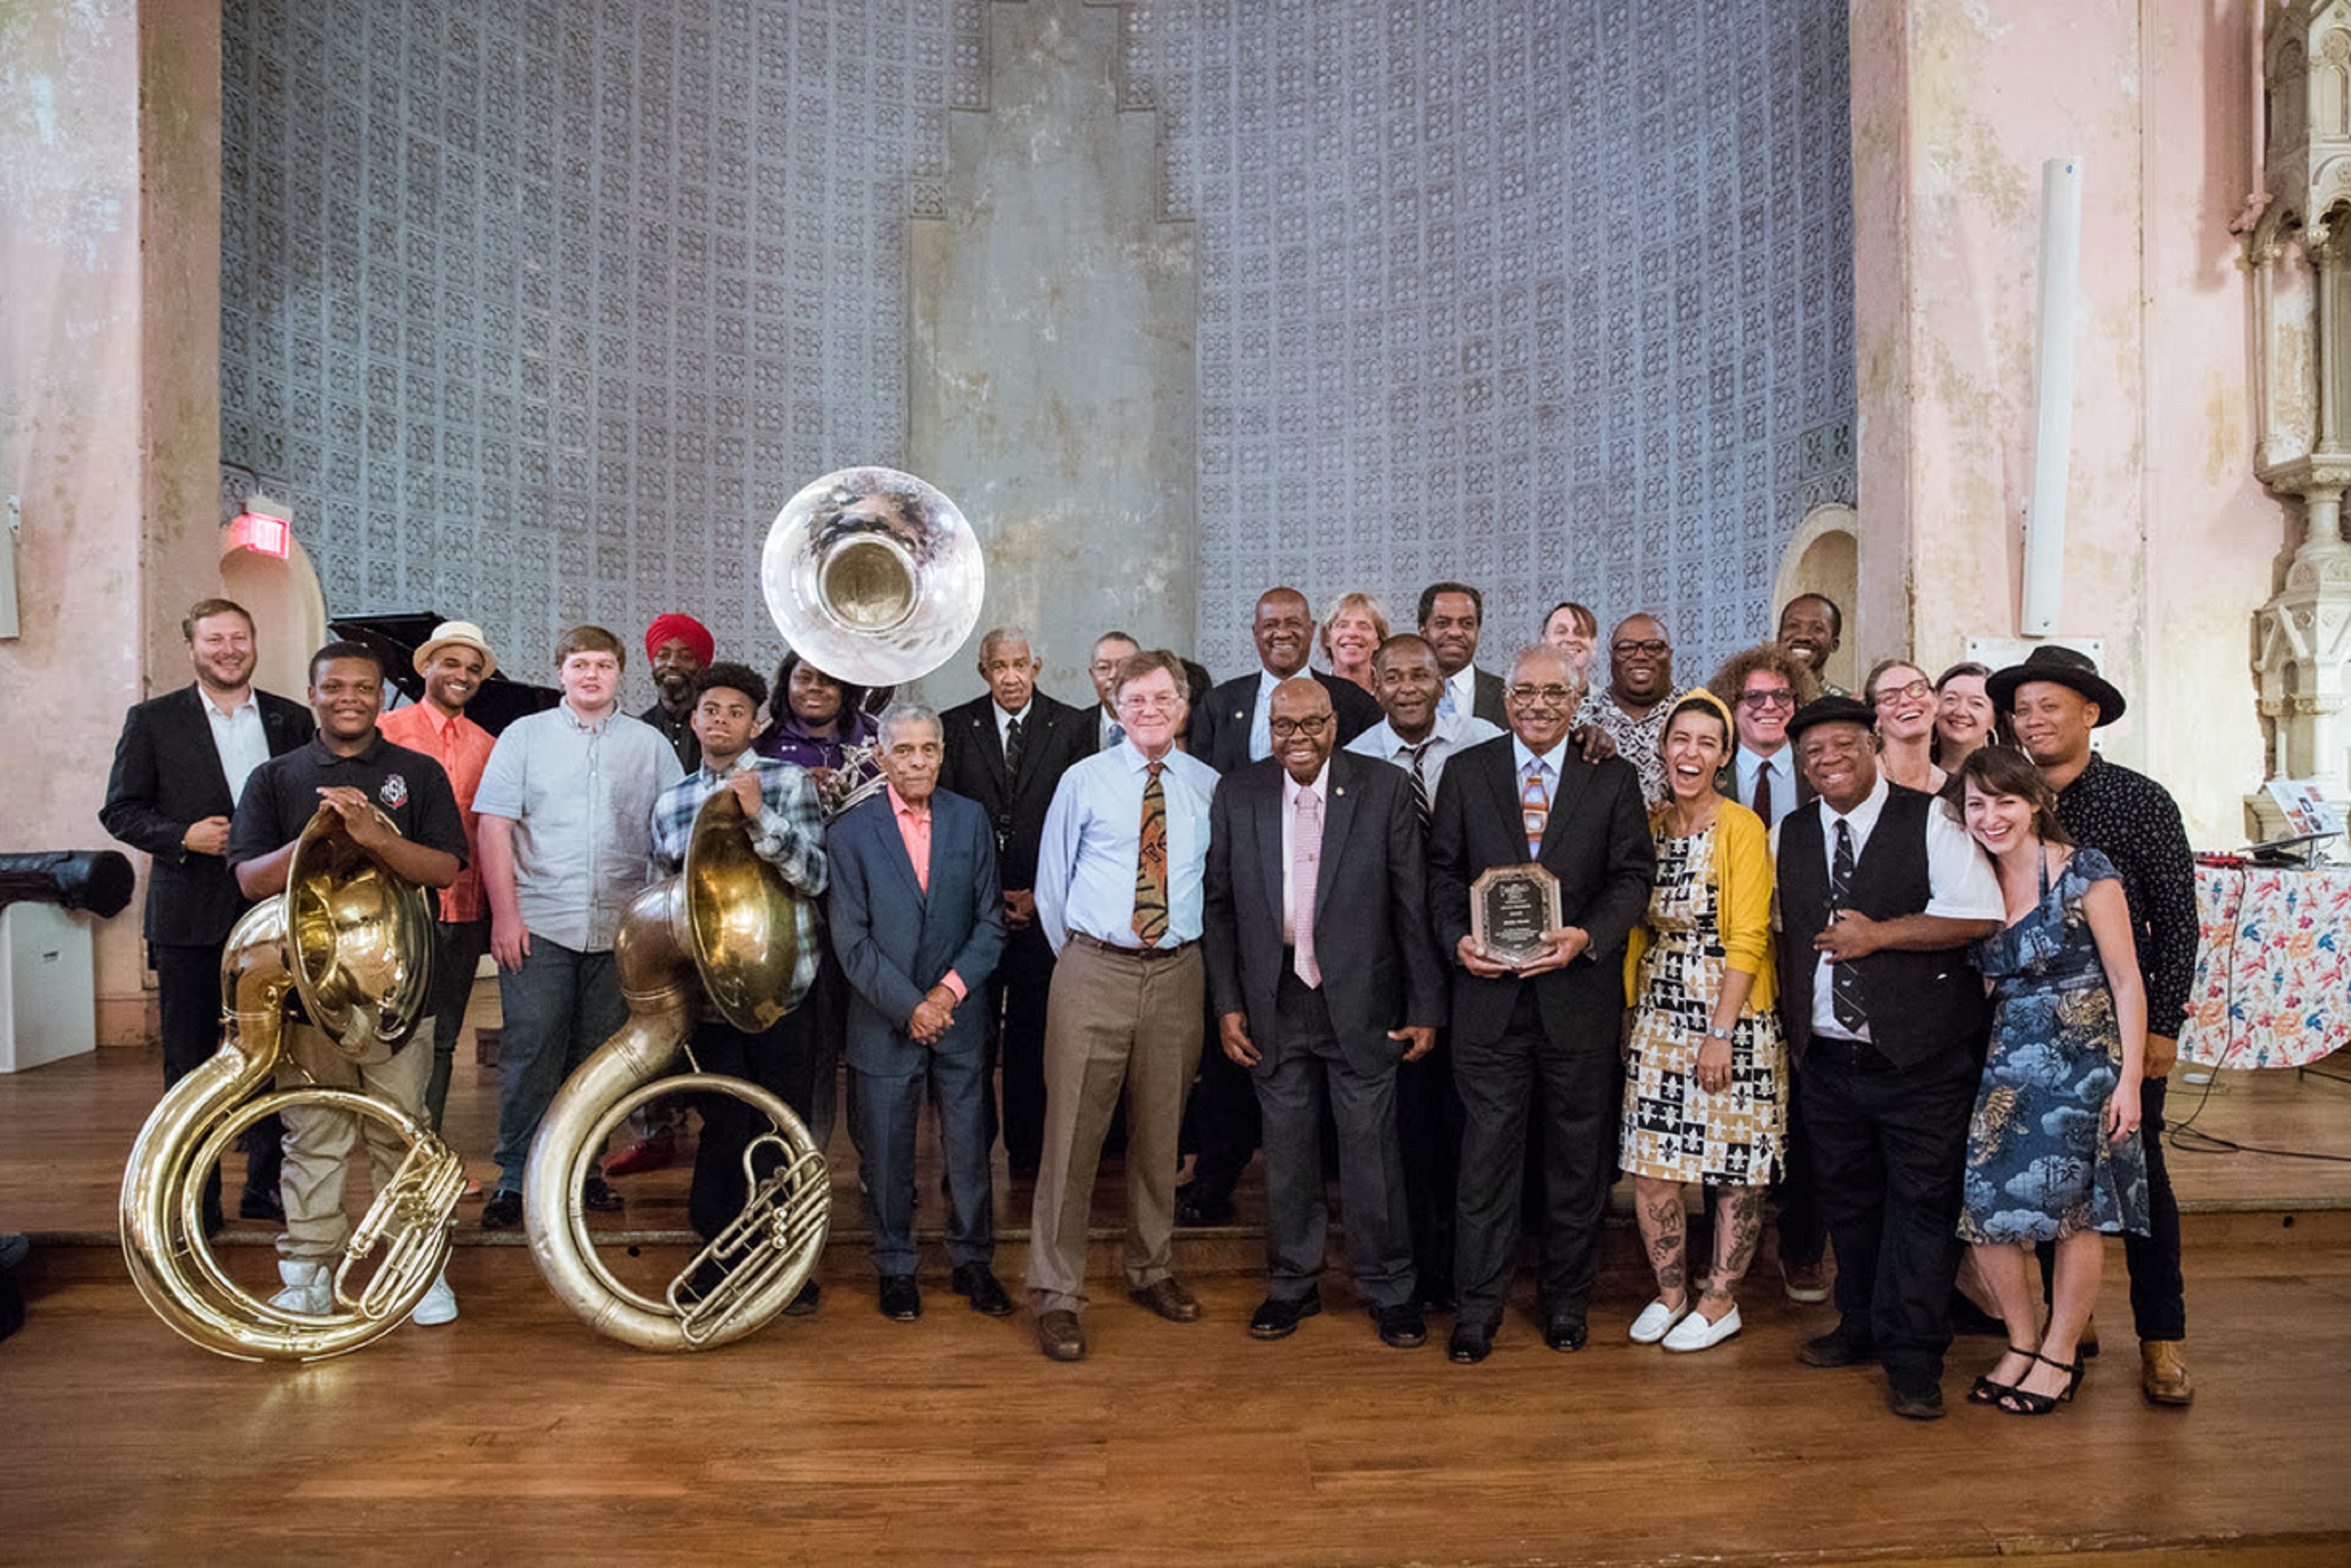 Help support the Preservation Hall Musical Collective